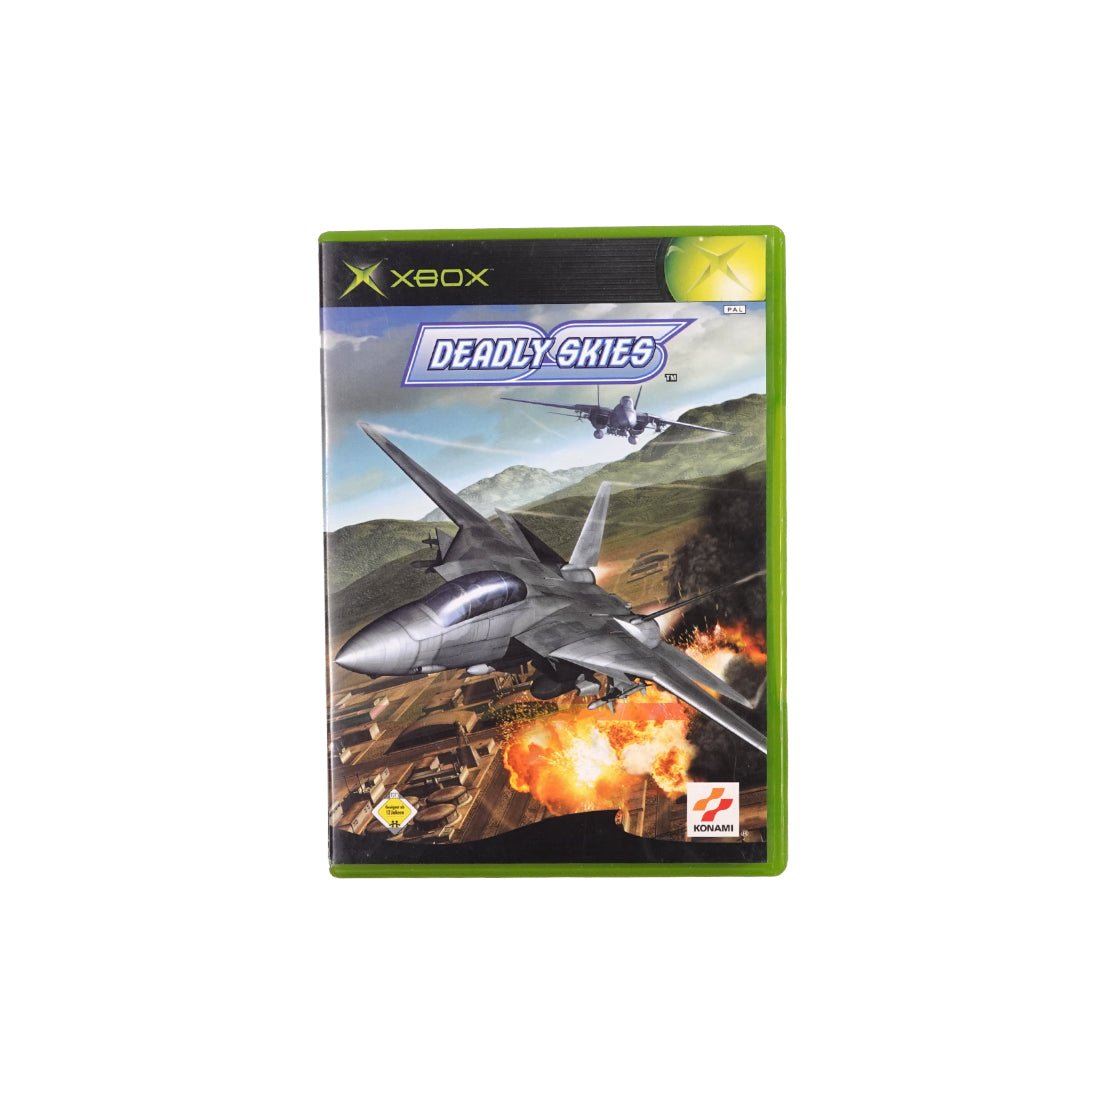 (Pre-Owned) Deadly Skies - Xbox - Store 974 | ستور ٩٧٤